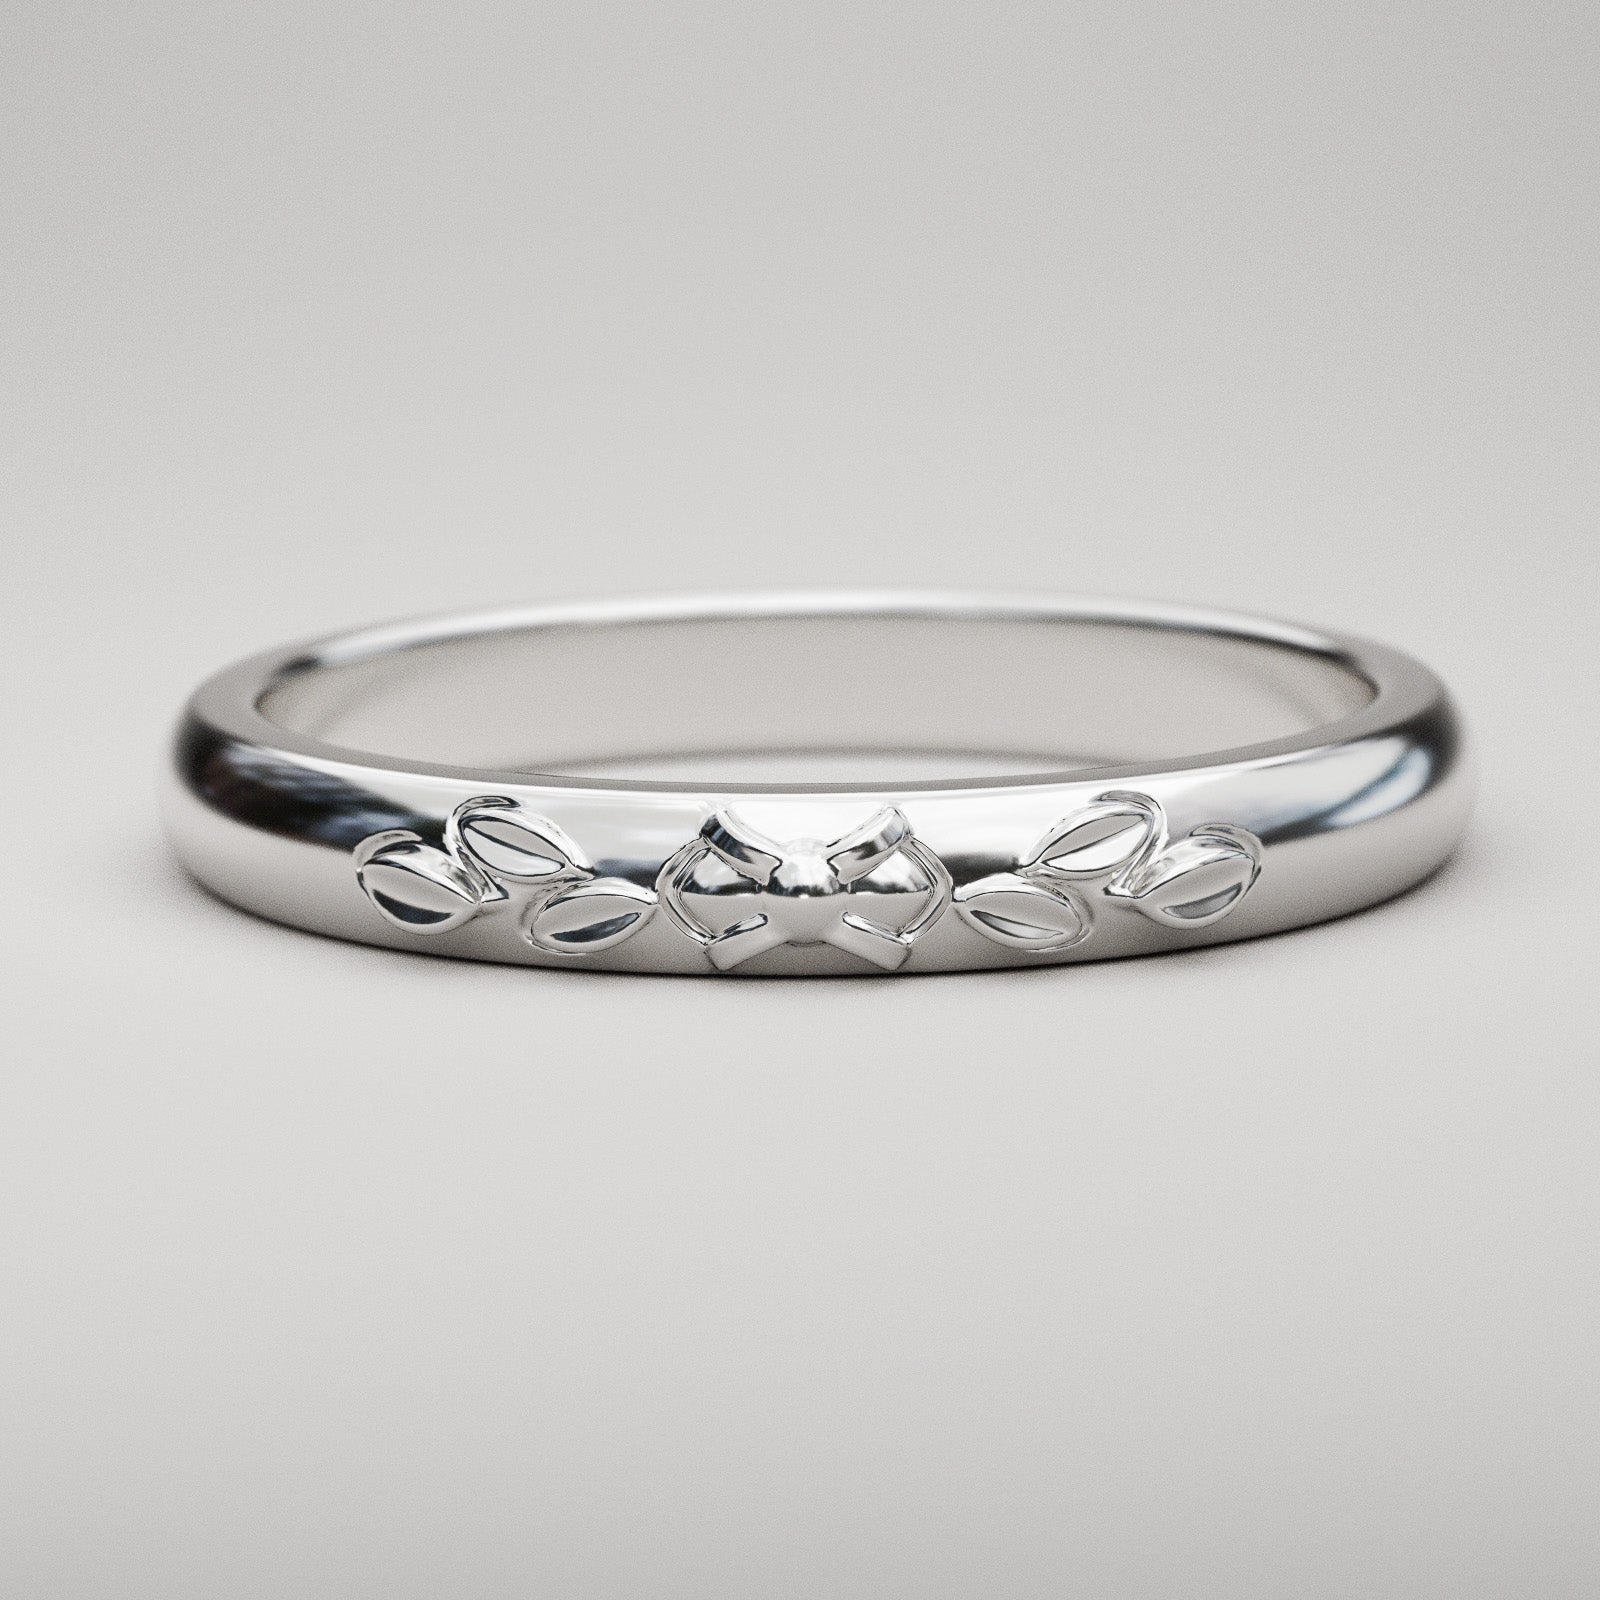 Vintage Style Wedding Band with Leaves in 14k solid white gold